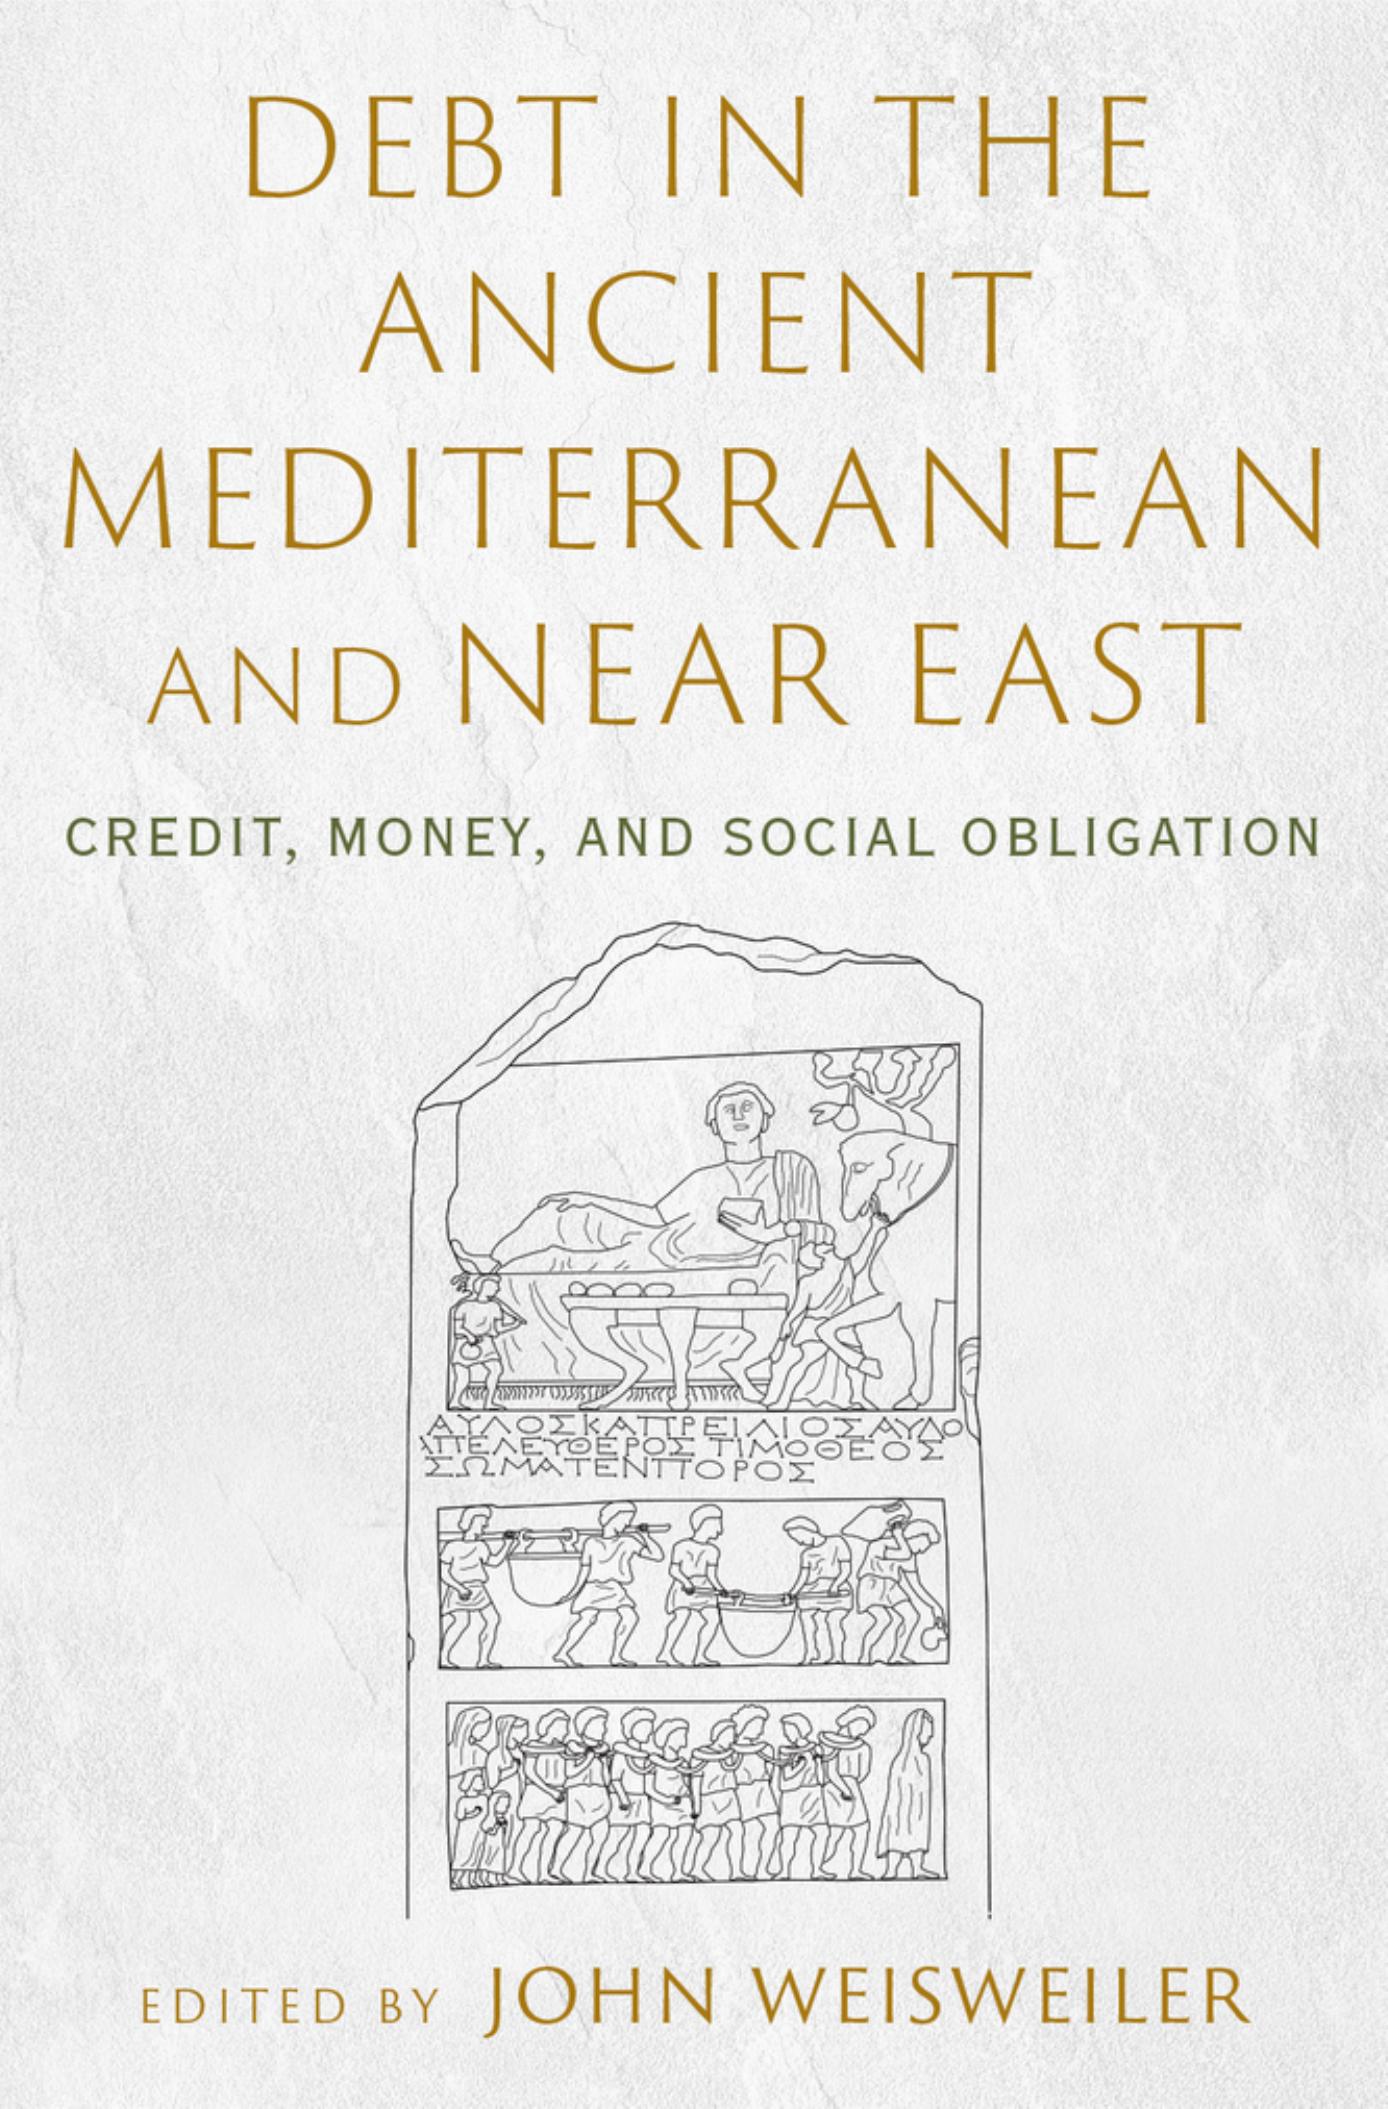 Debt in the Ancient Mediterranean and Near East by John Weisweiler;